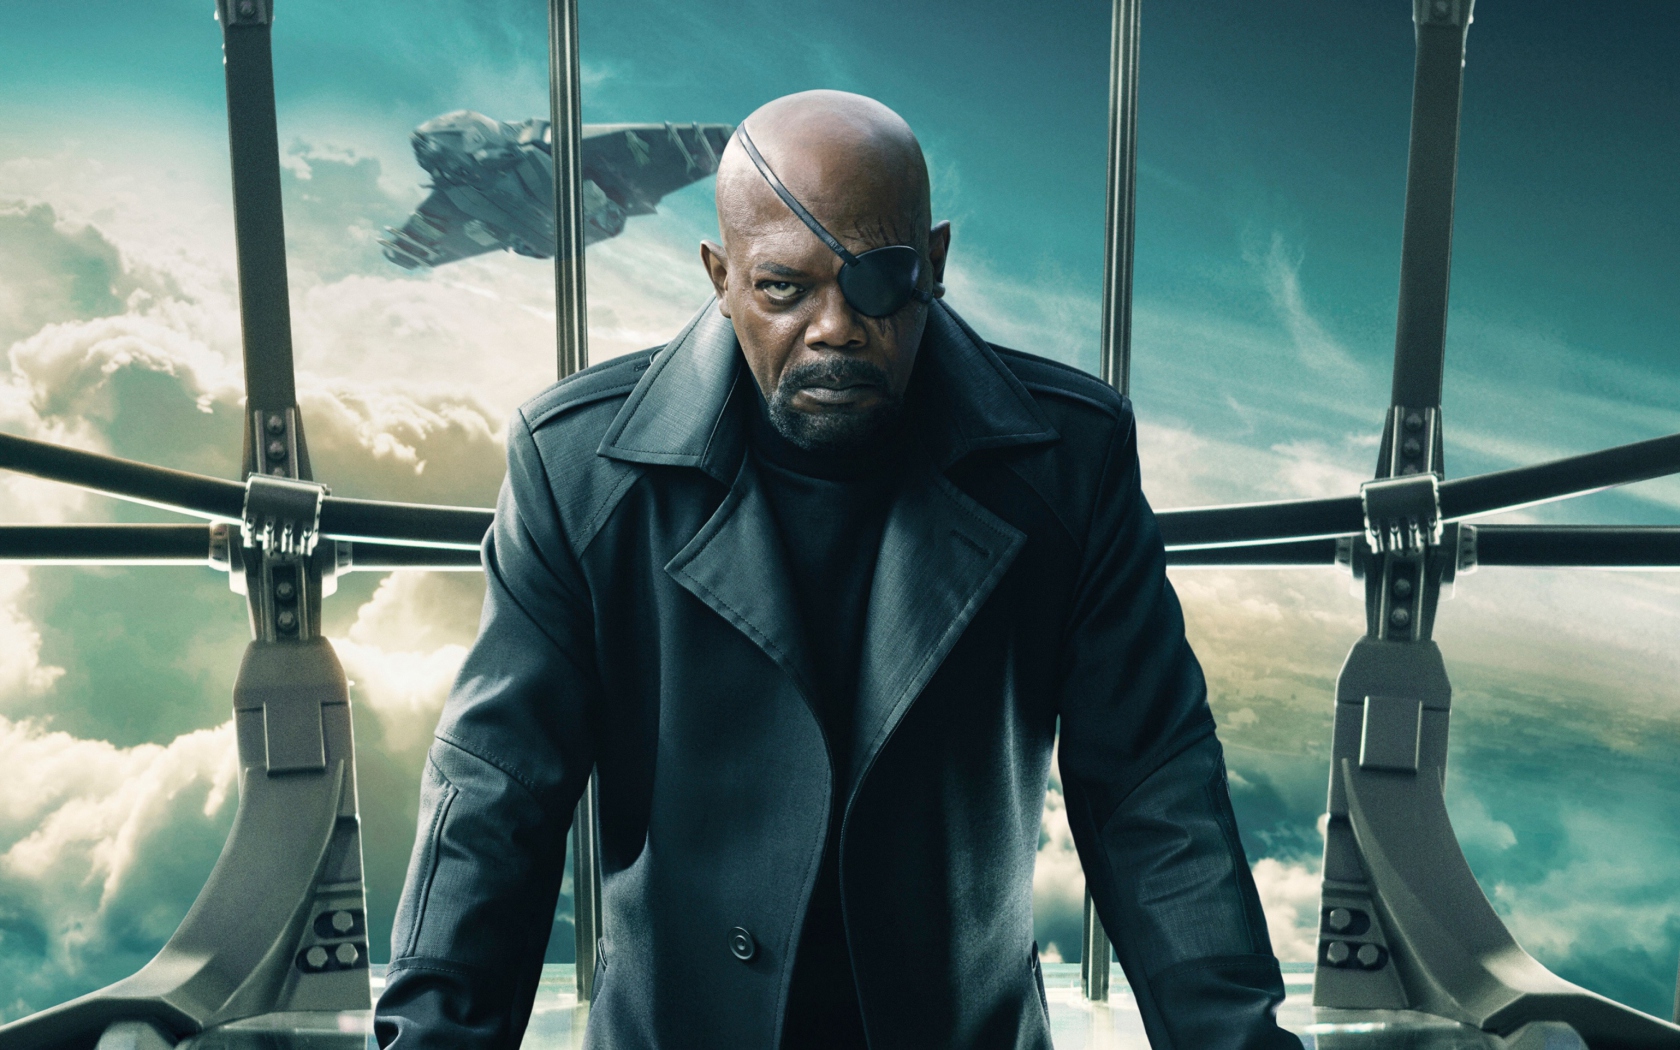 Nick Fury Captain America The Winter Soldier wallpaper 1680x1050